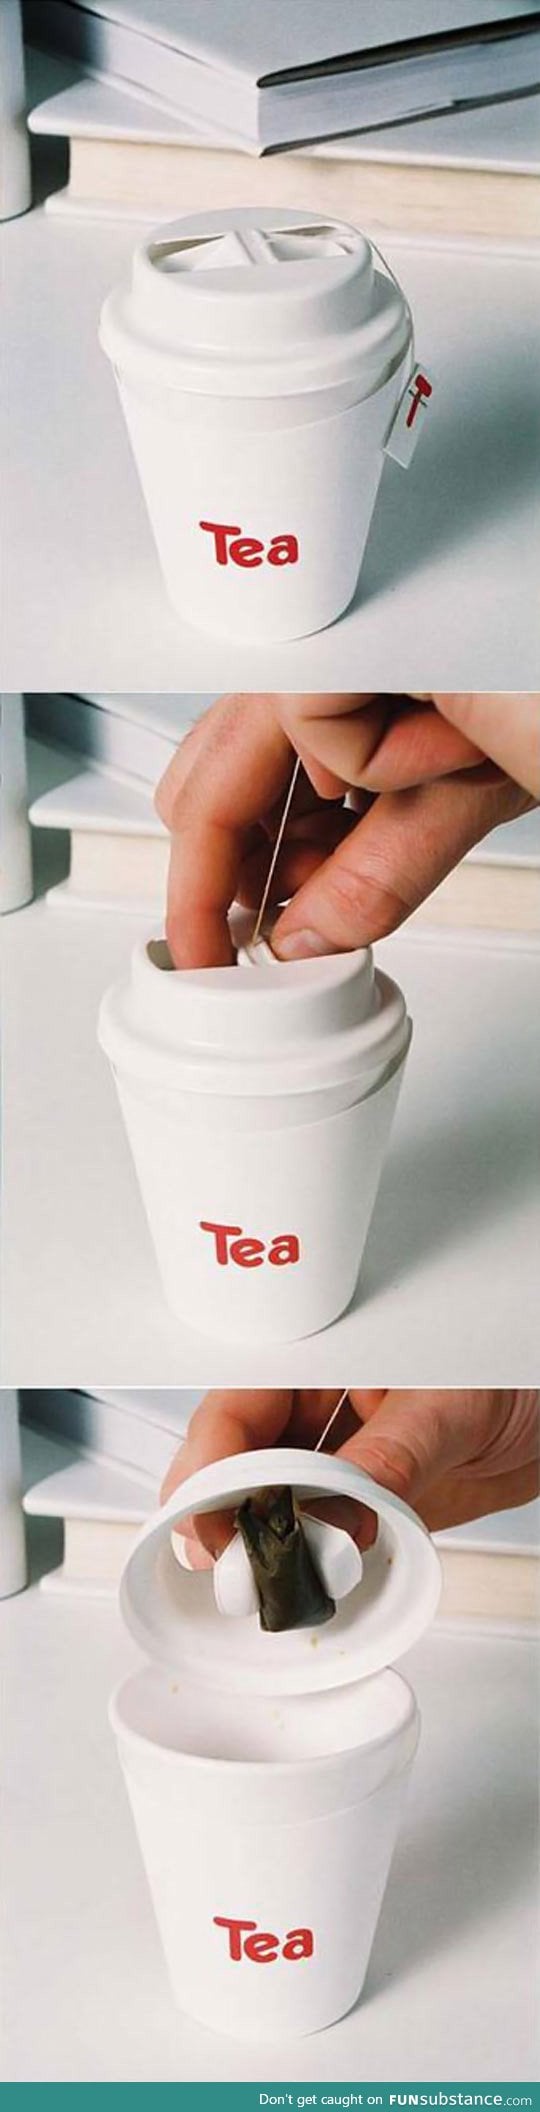 This cup design is really clever